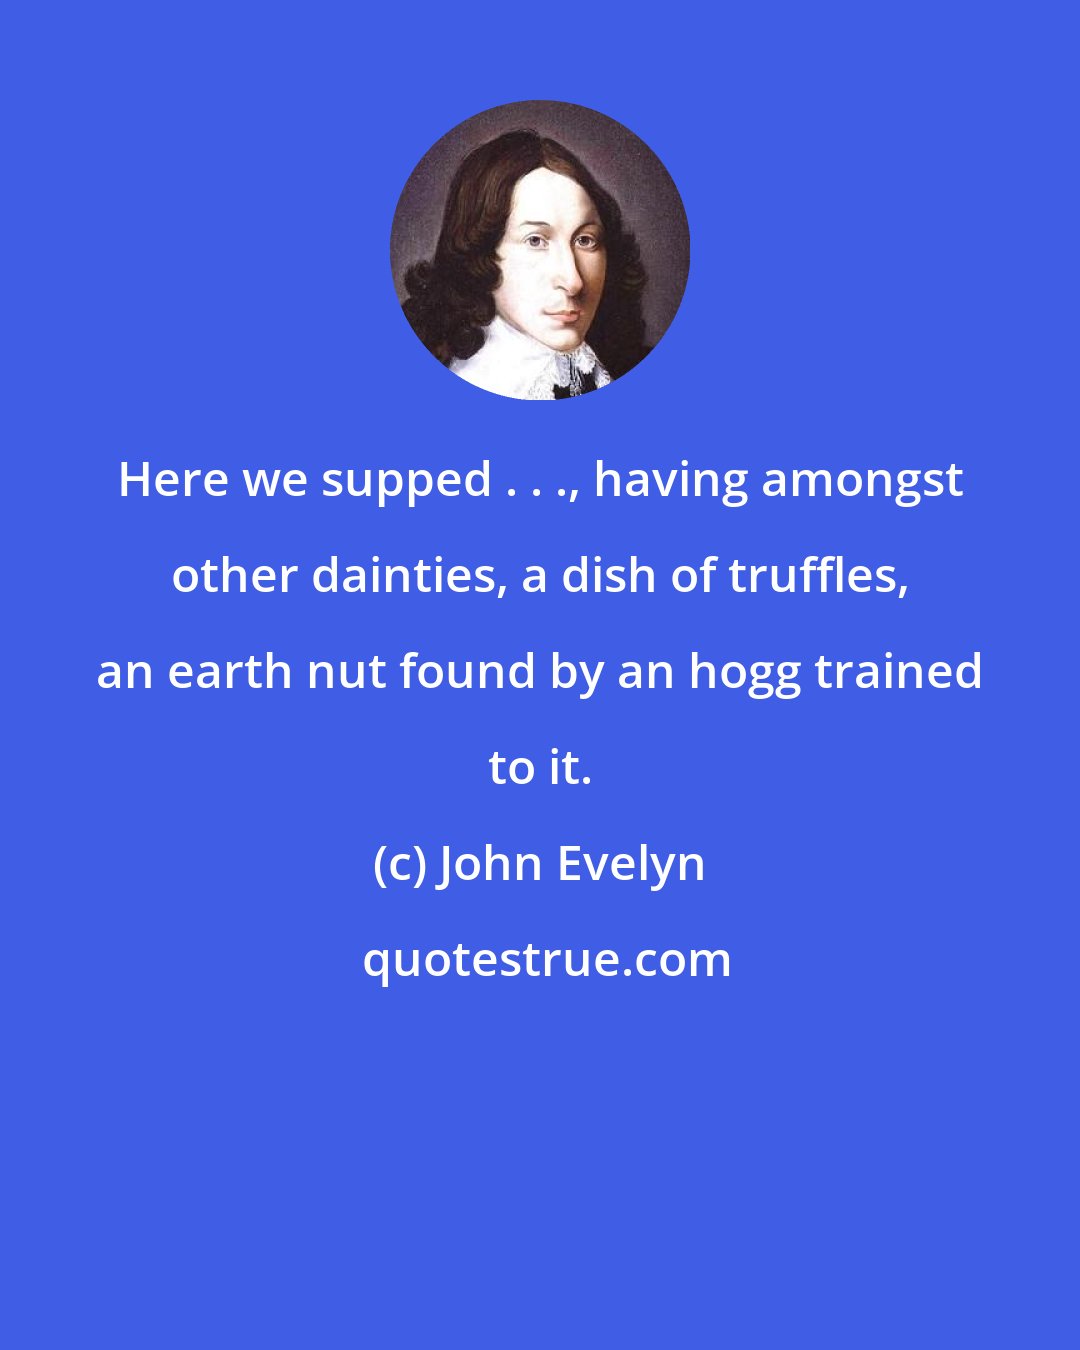 John Evelyn: Here we supped . . ., having amongst other dainties, a dish of truffles, an earth nut found by an hogg trained to it.